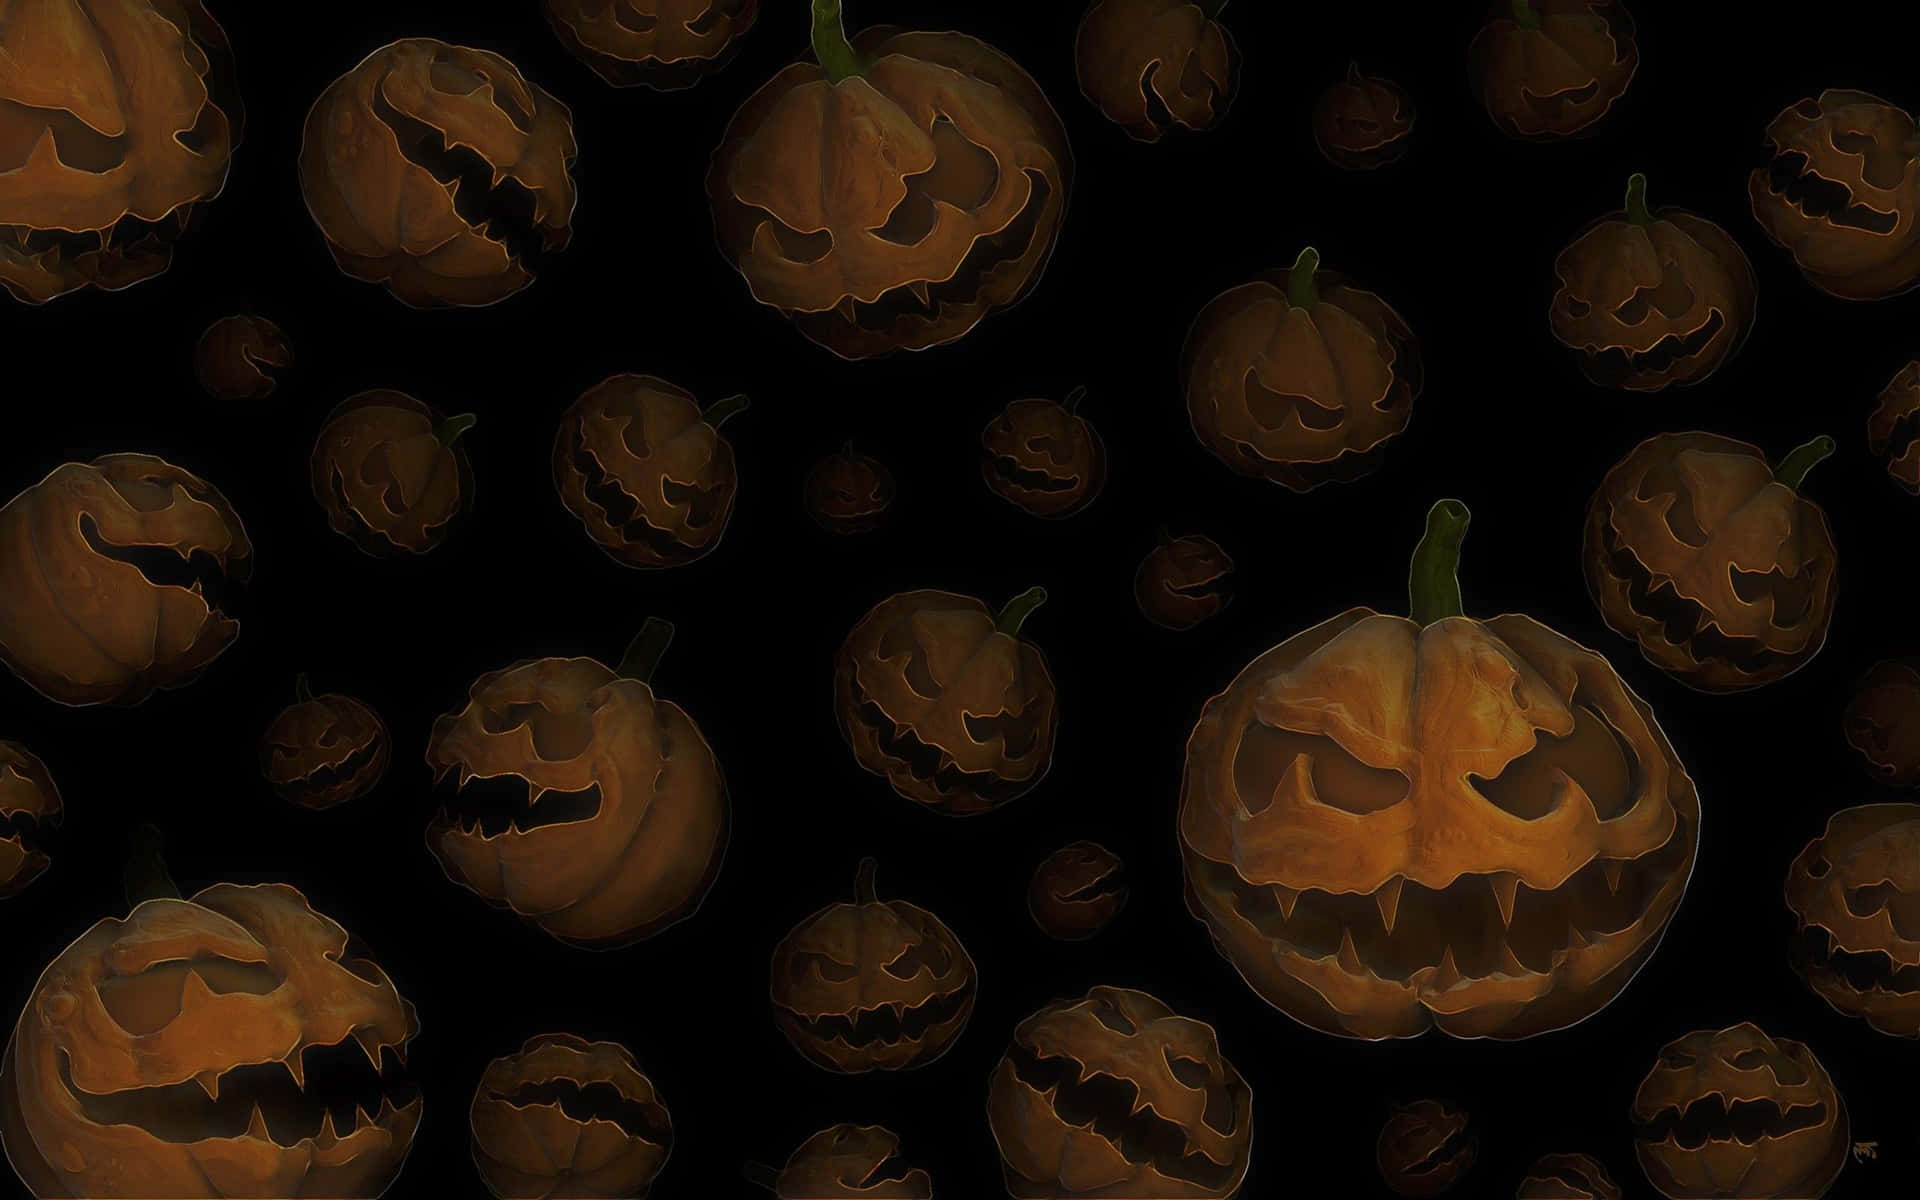 Get Spooky With This Halloween Tumblr Aesthetic Wallpaper